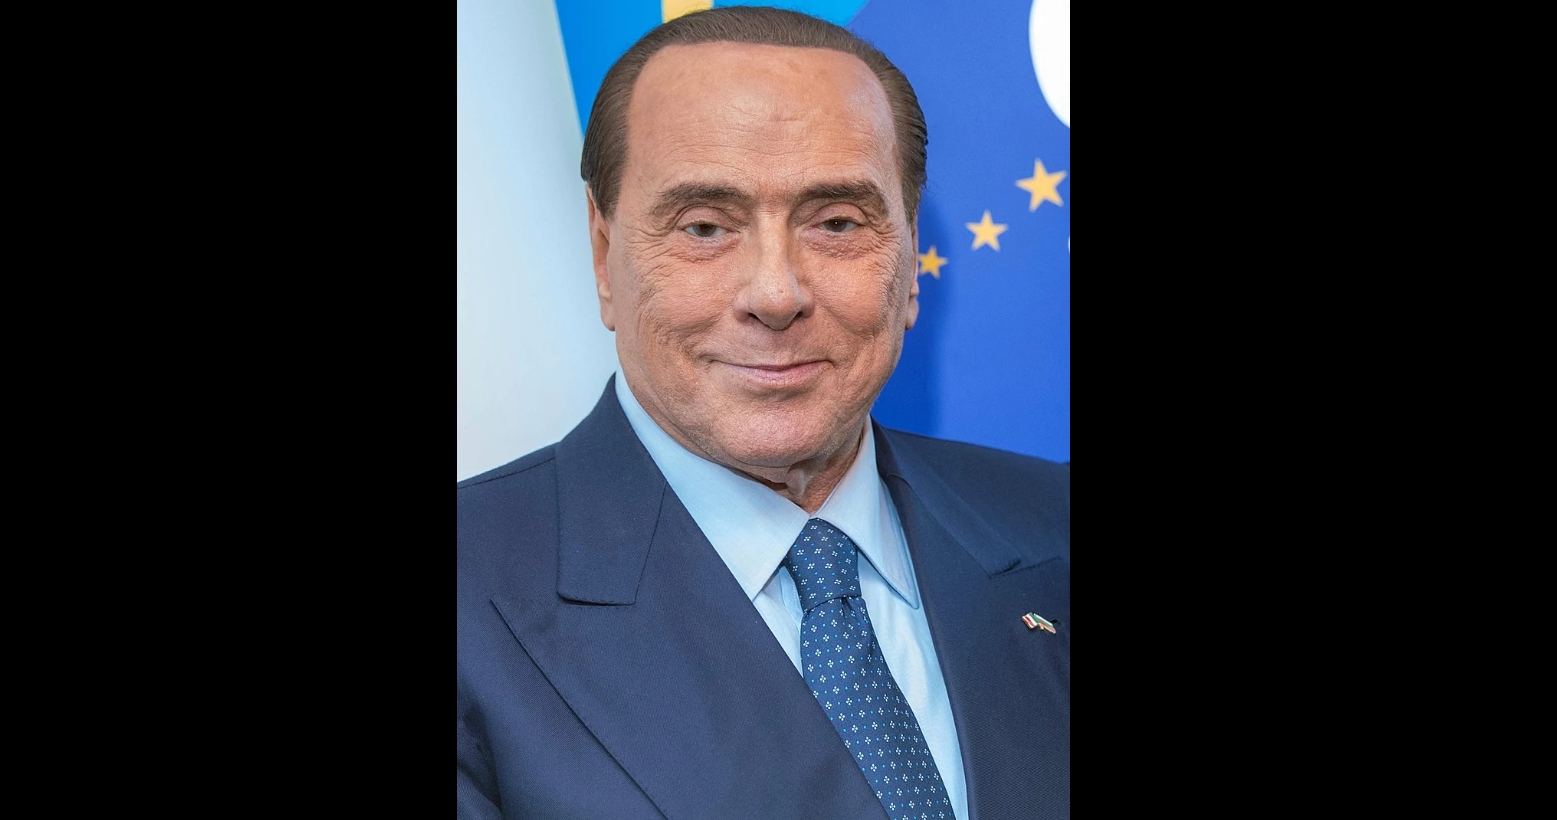 Silvio Berlusconi w 2018 r, fot. Autorstwa European People’s Party - https://www.flickr.com/photos/eppofficial/41250253725/, CC BY 2.0, https://commons.wikimedia.org/w/index.php?curid=69171193